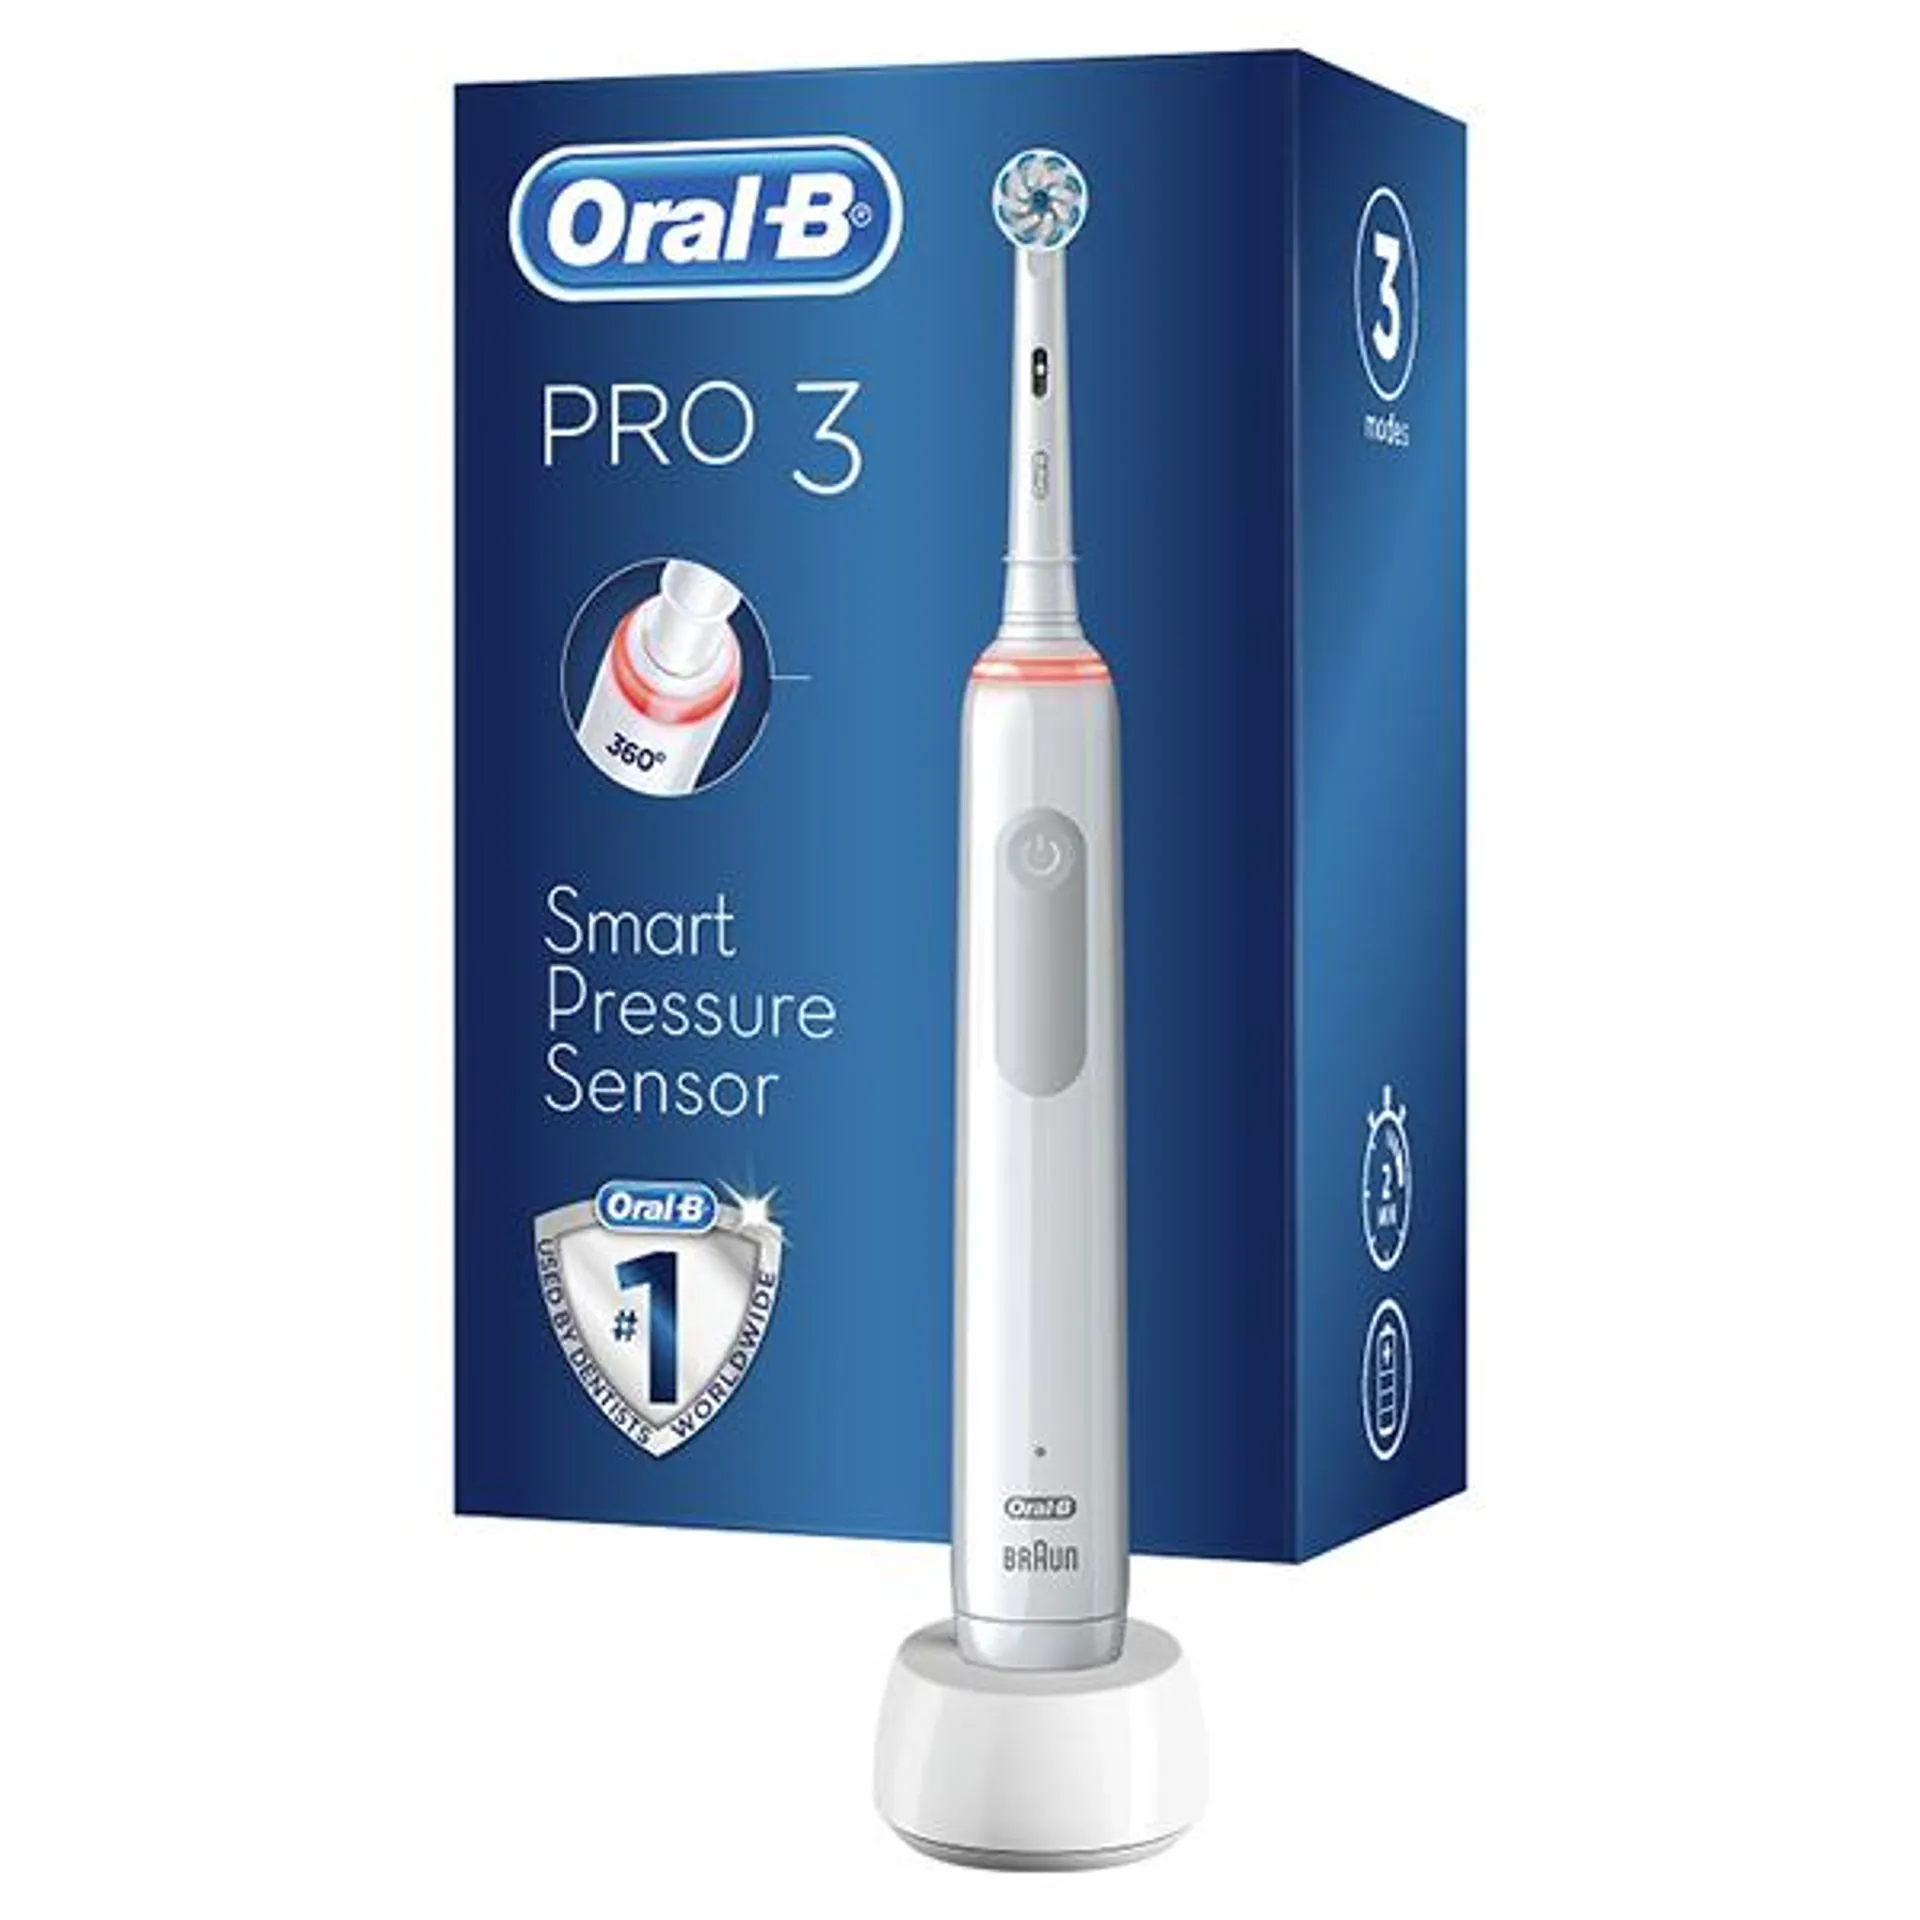 Oral-B Pro 3 3000 Sensi UltraThin White Electric Rechargeable Toothbrush